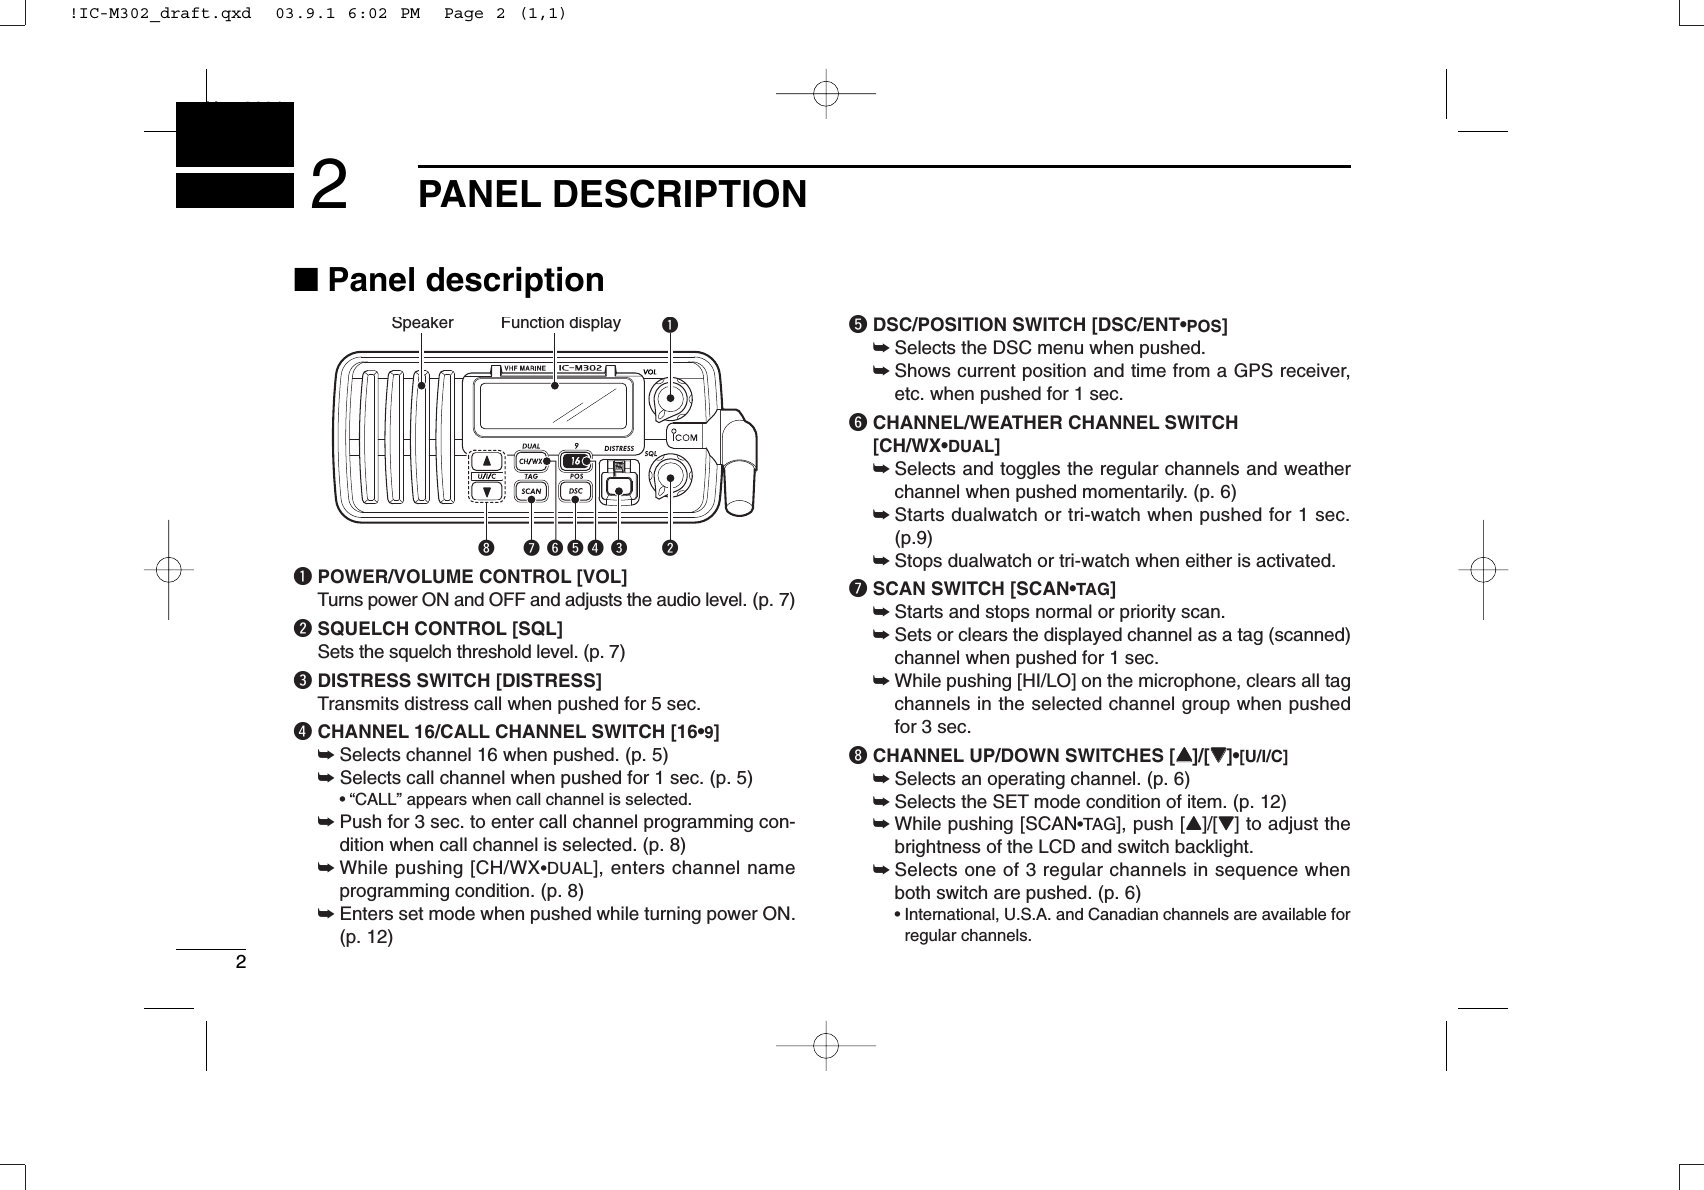 2PANEL DESCRIPTIONNew20012■Panel descriptionqPOWER/VOLUME CONTROL [VOL]Turns power ON and OFF and adjusts the audio level. (p. 7)wSQUELCH CONTROL [SQL]Sets the squelch threshold level. (p. 7)eDISTRESS SWITCH [DISTRESS]Transmits distress call when pushed for 5 sec.rCHANNEL 16/CALL CHANNEL SWITCH [16•9]➥Selects channel 16 when pushed. (p. 5)➥Selects call channel when pushed for 1 sec. (p. 5)• “CALL” appears when call channel is selected.➥Push for 3 sec. to enter call channel programming con-dition when call channel is selected. (p. 8)➥While pushing [CH/WX•DUAL], enters channel nameprogramming condition. (p. 8)➥Enters set mode when pushed while turning power ON.(p. 12)tDSC/POSITION SWITCH [DSC/ENT•POS]➥Selects the DSC menu when pushed.➥Shows current position and time from a GPS receiver,etc. when pushed for 1 sec.yCHANNEL/WEATHER CHANNEL SWITCH[CH/WX•DUAL]➥Selects and toggles the regular channels and weatherchannel when pushed momentarily. (p. 6)➥Starts dualwatch or tri-watch when pushed for 1 sec. (p.9)➥Stops dualwatch or tri-watch when either is activated.uSCAN SWITCH [SCAN•TAG]➥Starts and stops normal or priority scan.➥Sets or clears the displayed channel as a tag (scanned)channel when pushed for 1 sec.➥While pushing [HI/LO] on the microphone, clears all tagchannels in the selected channel group when pushedfor 3 sec.iCHANNEL UP/DOWN SWITCHES [YY]/[ZZ]•[U/I/C]➥Selects an operating channel. (p. 6)➥Selects the SET mode condition of item. (p. 12)➥While pushing [SCAN•TAG], push [Y]/[Z] to adjust thebrightness of the LCD and switch backlight.➥Selects one of 3 regular channels in sequence whenboth switch are pushed. (p. 6)• International, U.S.A. and Canadian channels are available forregular channels.Speaker Function display qwi u ytr e!IC-M302_draft.qxd  03.9.1 6:02 PM  Page 2 (1,1)